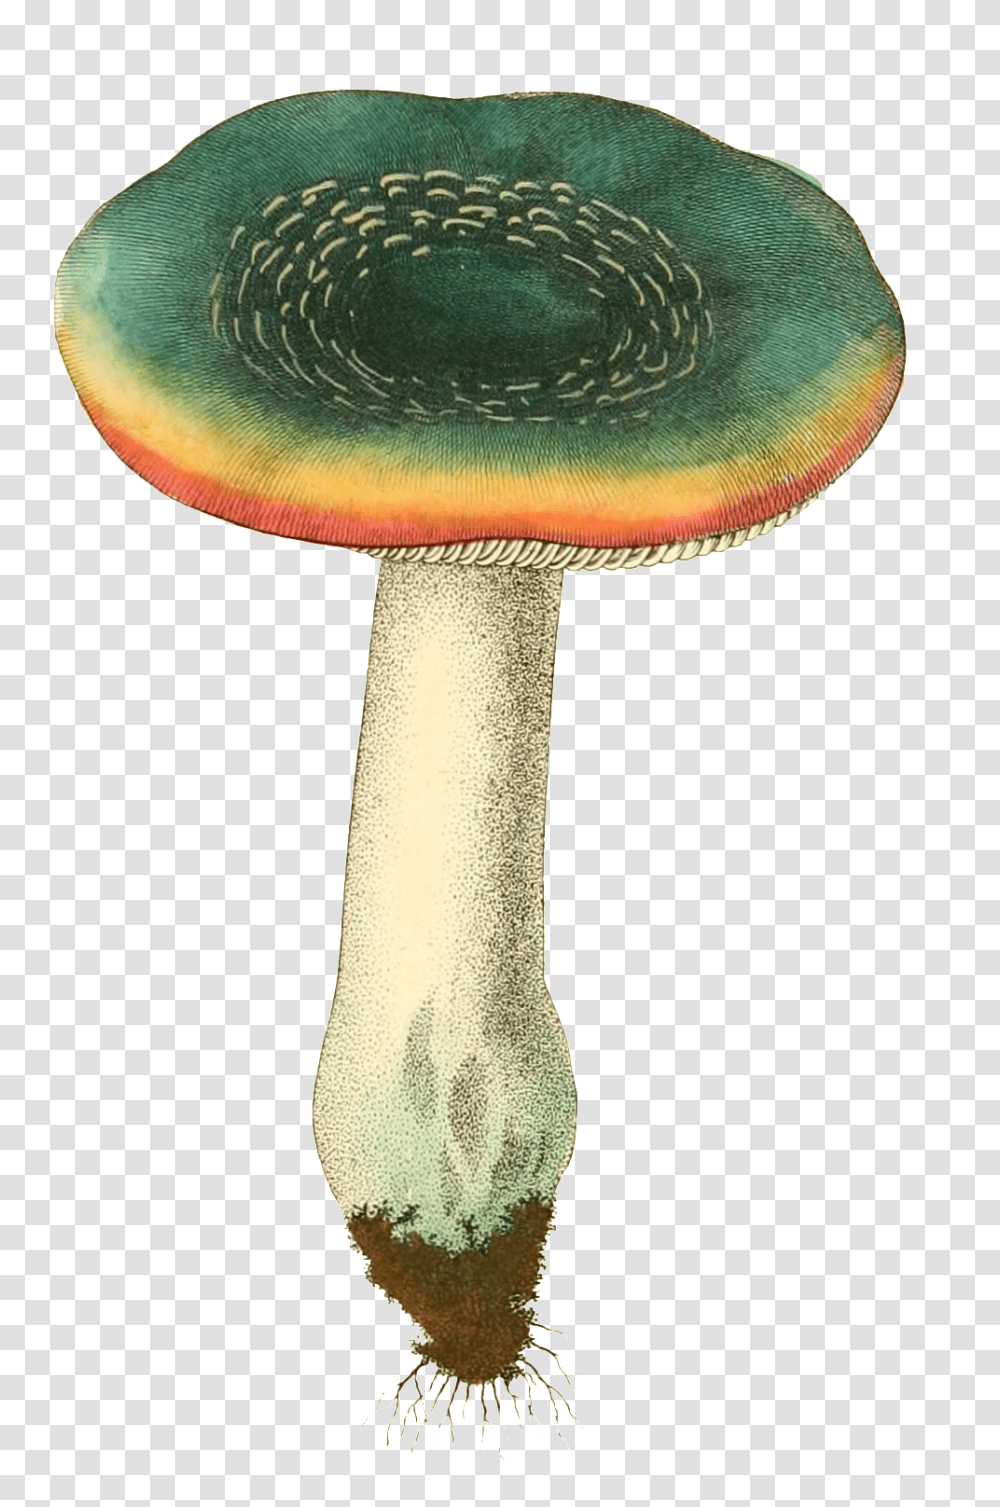 Wild Mushroom Plant Vector About Ink Green, Agaric, Fungus, Amanita Transparent Png